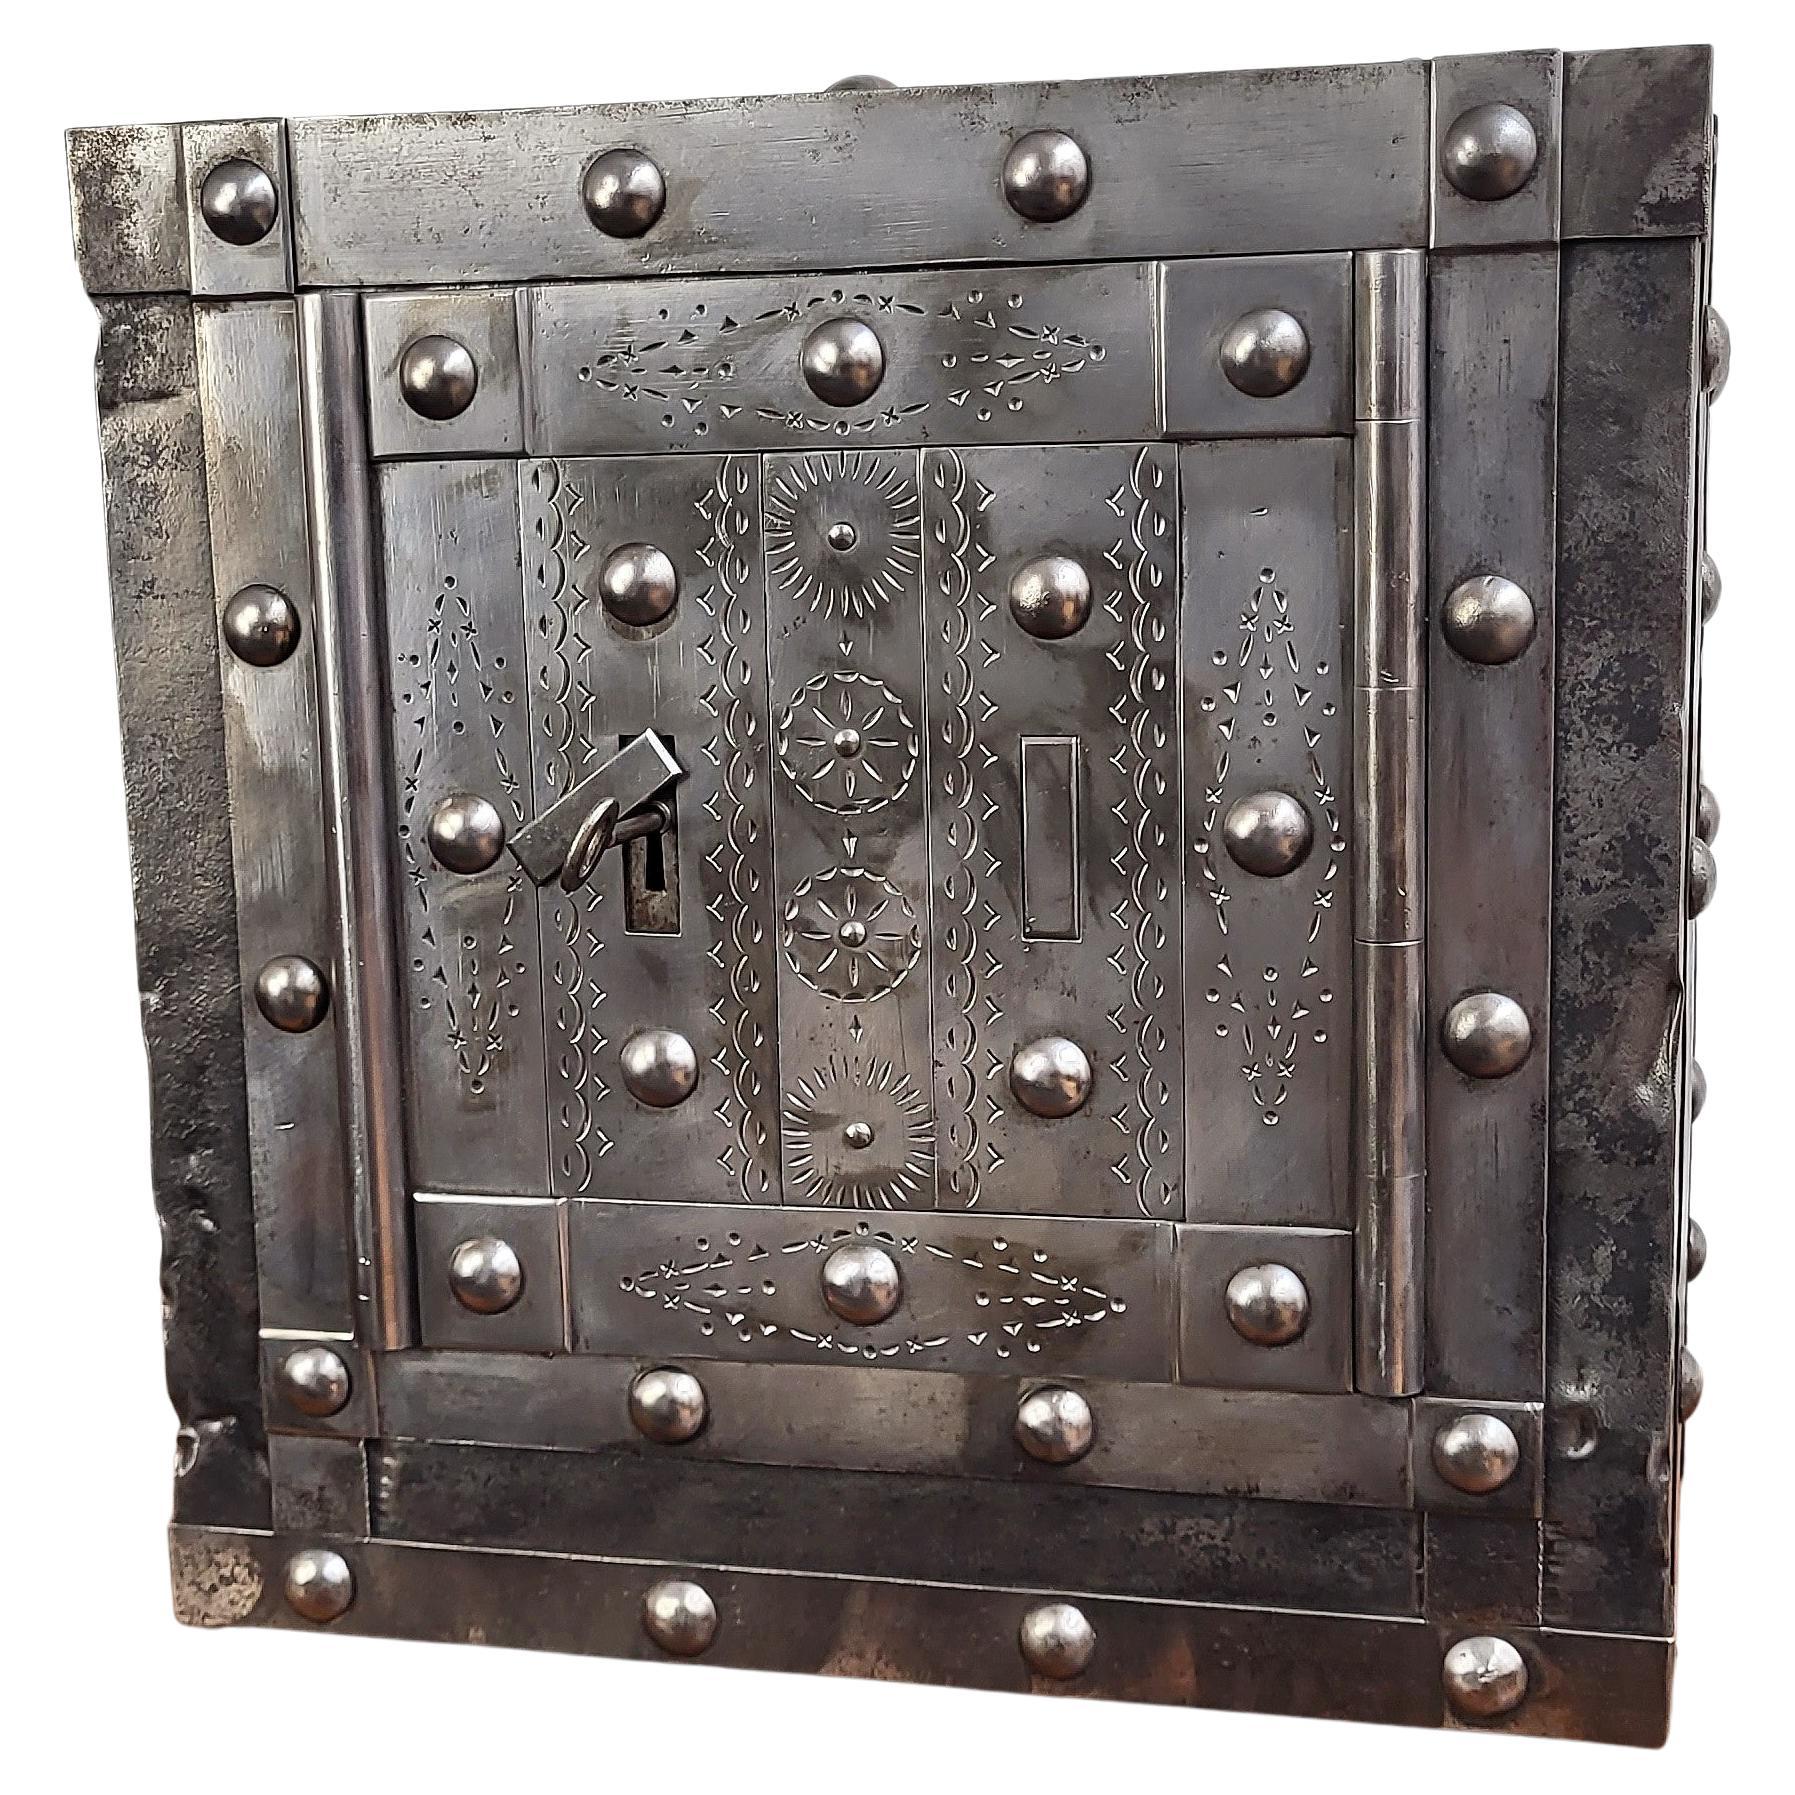 Italian 18th Century Wrought Iron Studded Antique Safe Strong Box